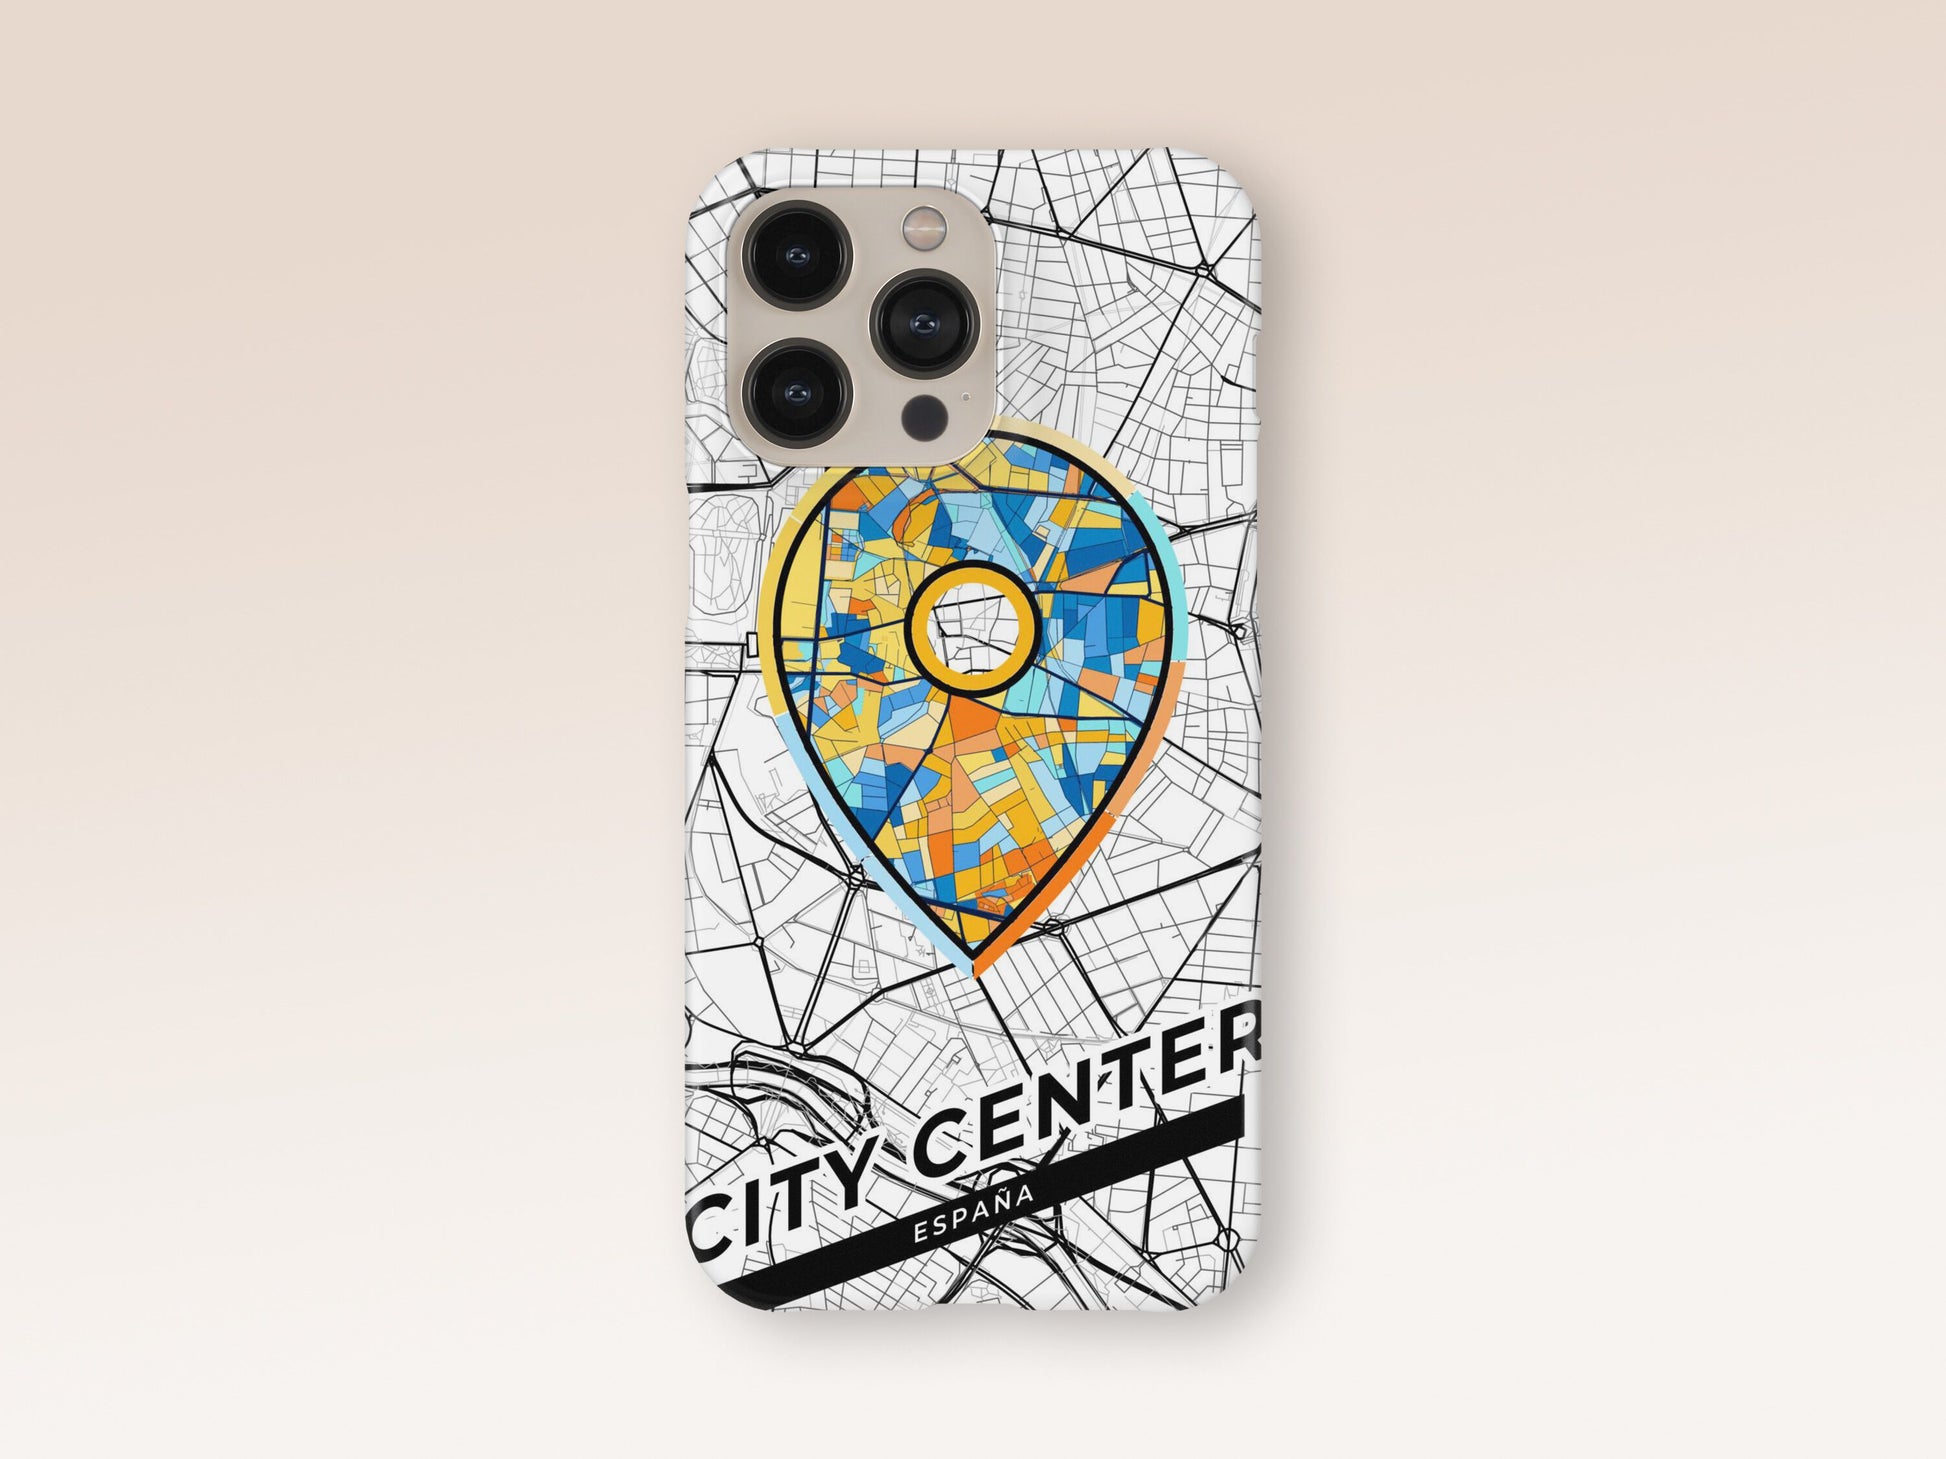 City Center Spain slim phone case with colorful icon. Birthday, wedding or housewarming gift. Couple match cases. 1